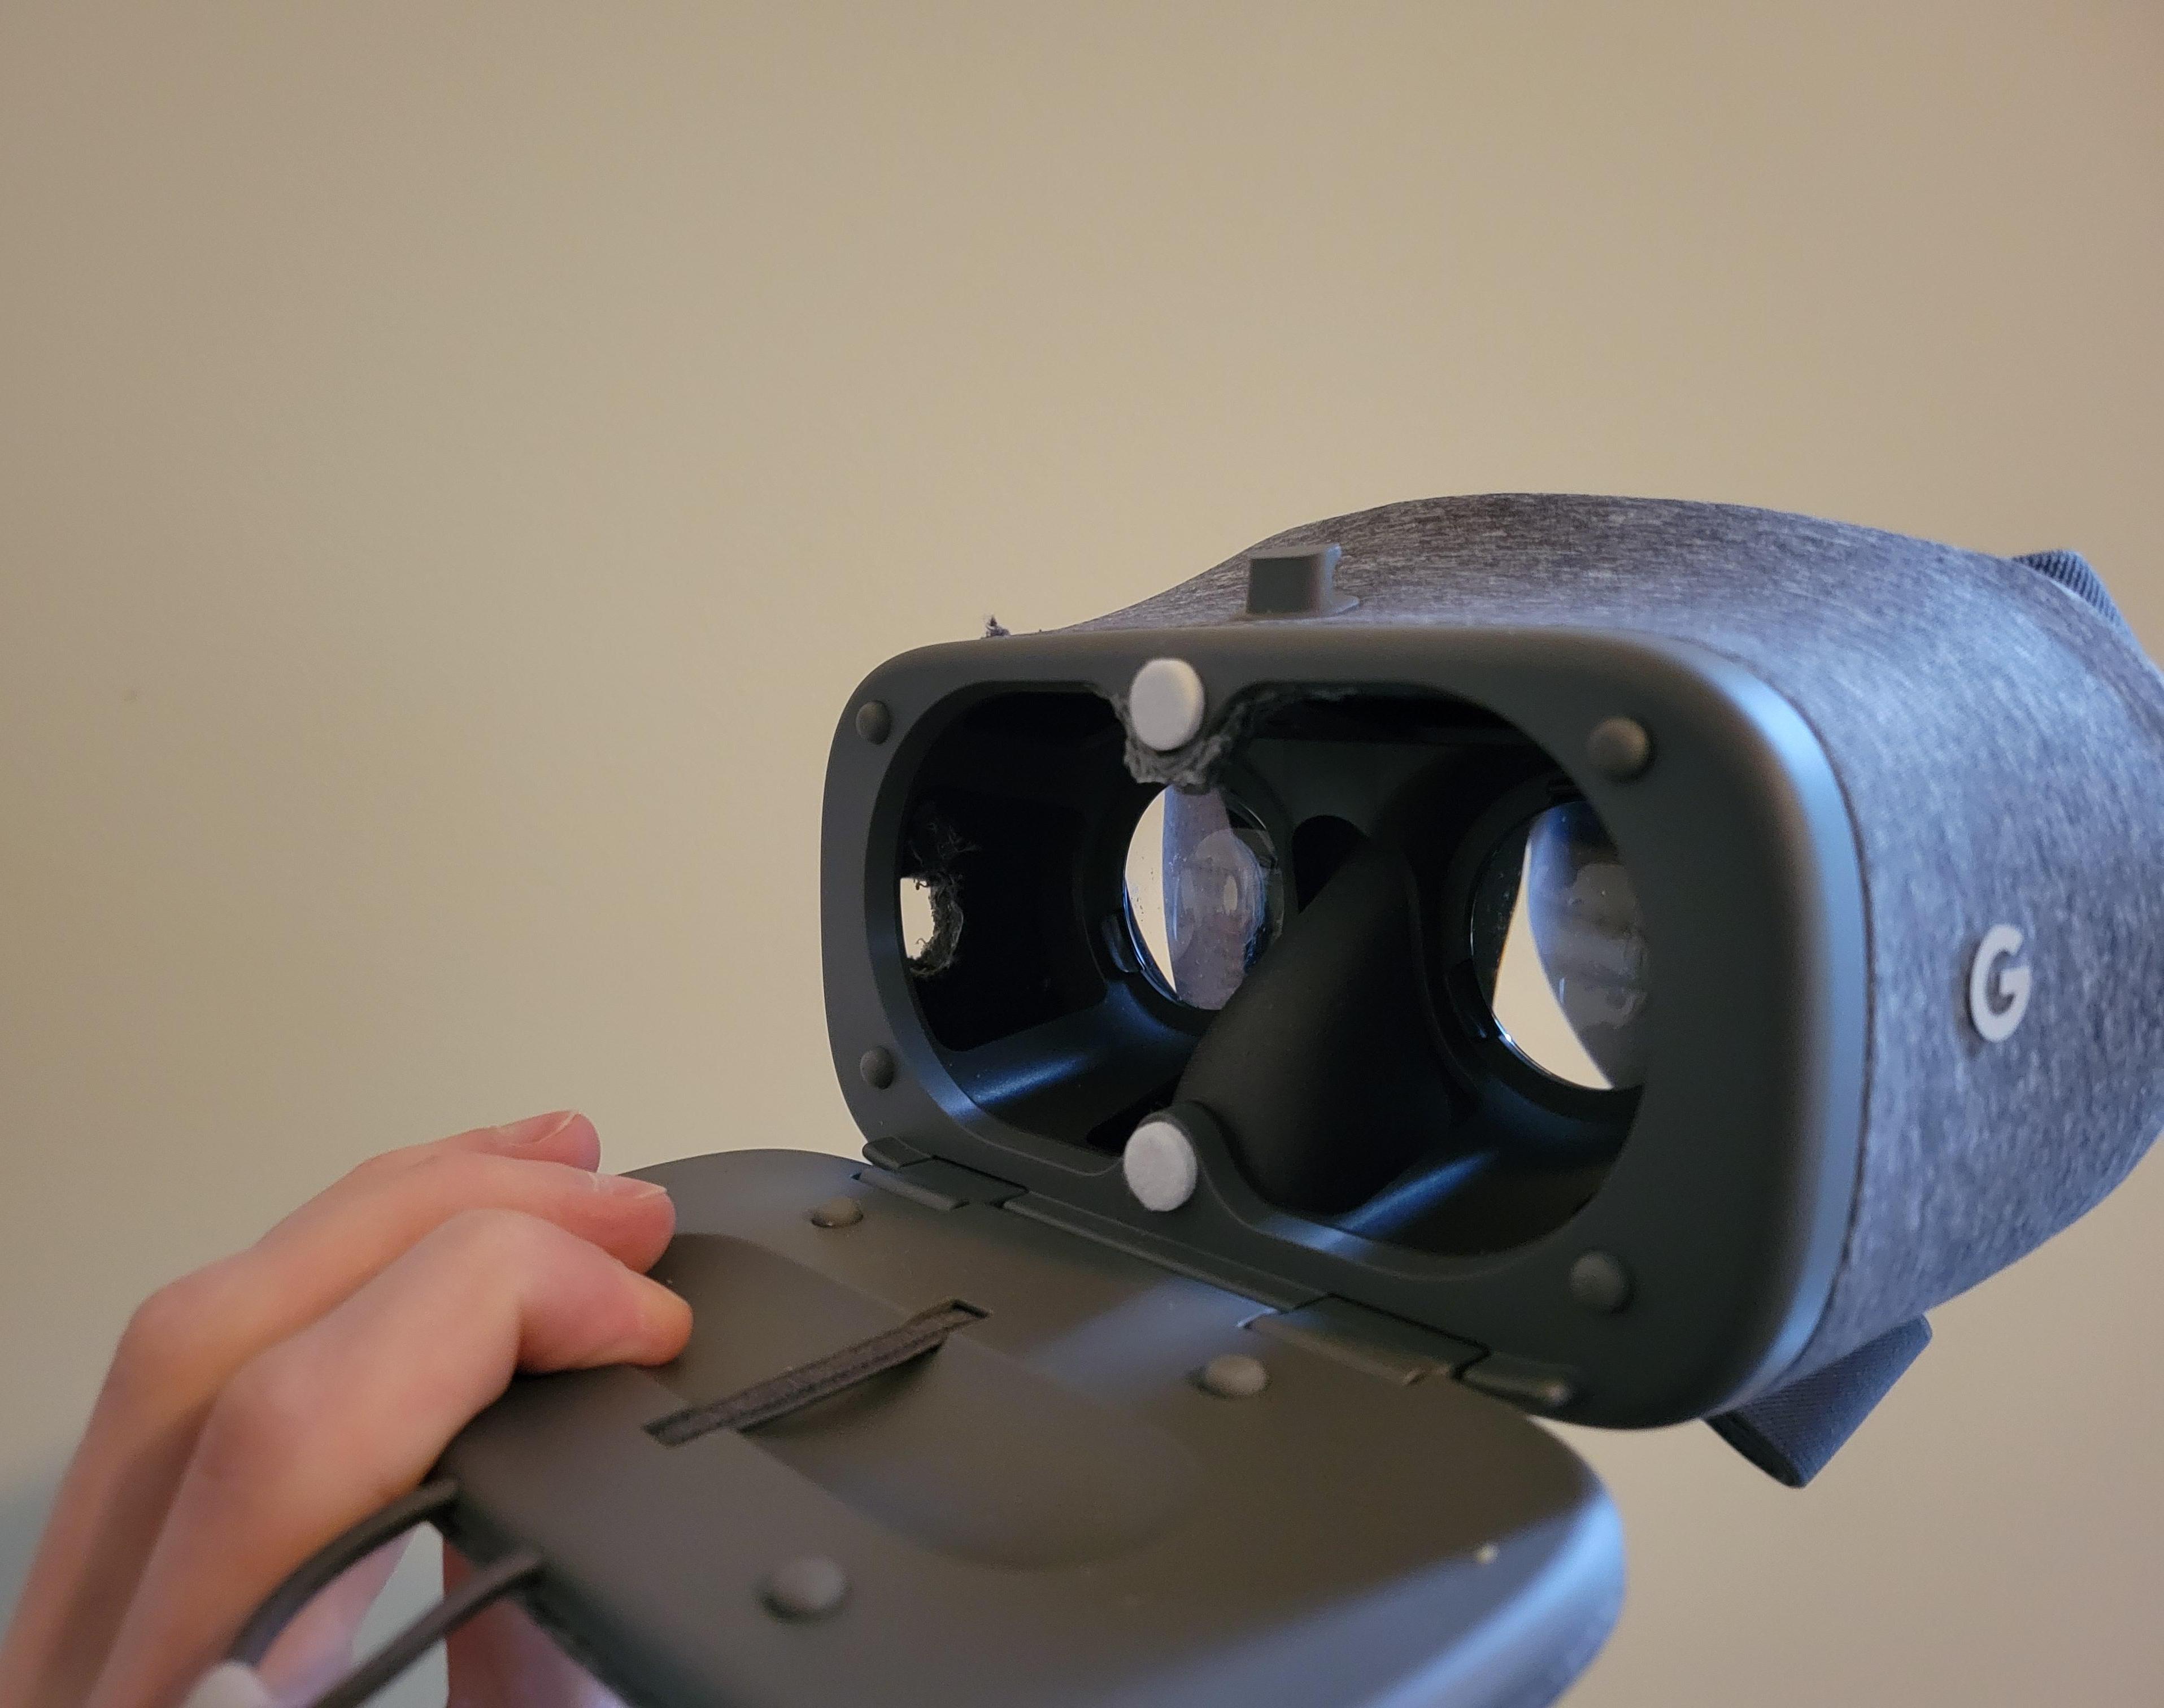 Using the Google Cardboard Viewer With a Google Daydream Headset